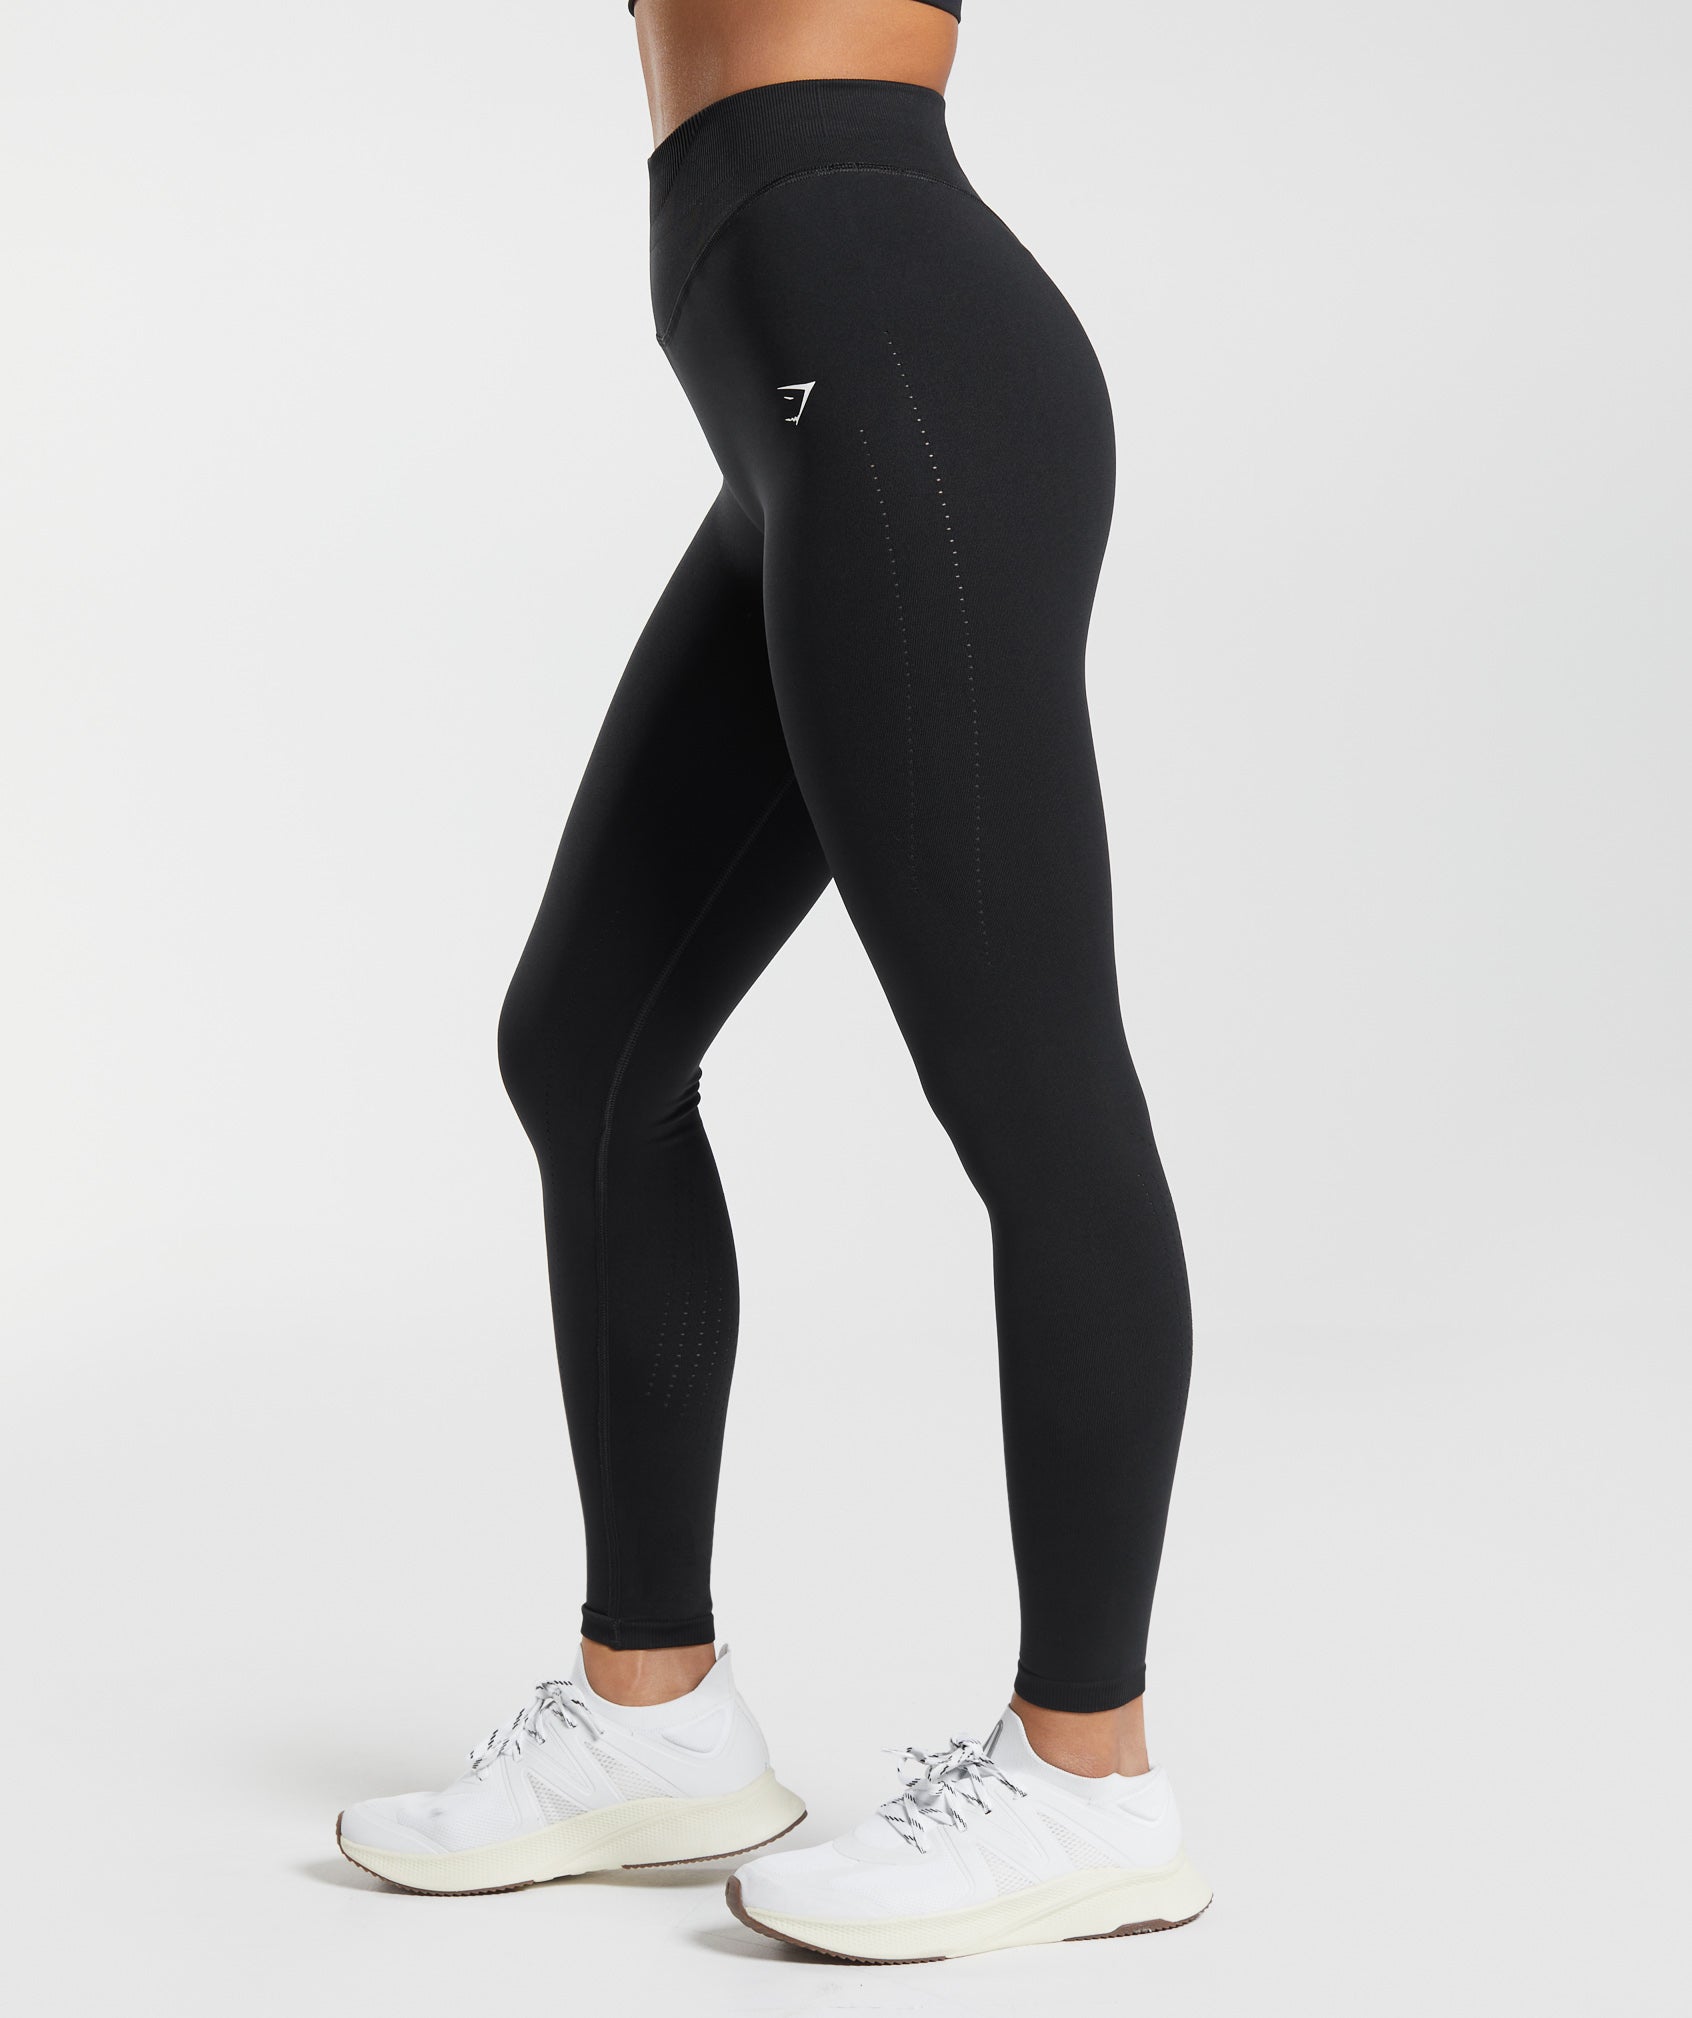 Seamless Leggings – Famous for Comfort & Style